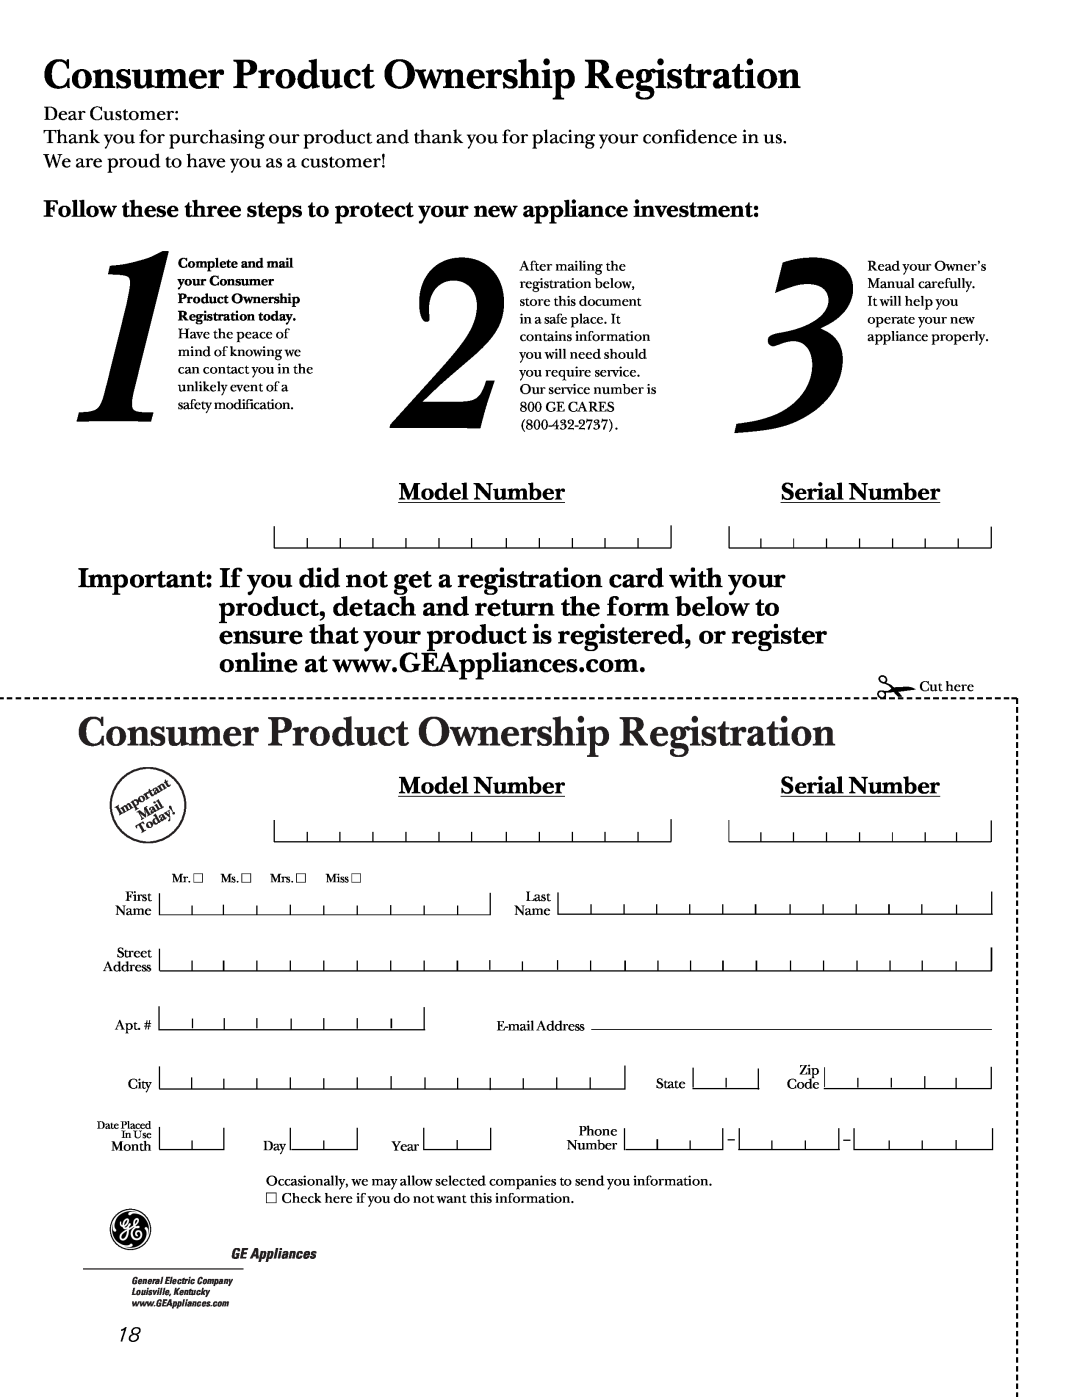 GE MG_24, AG_14 installation instructions Model Number, Serial Number, Consumer Product Ownership Registration 